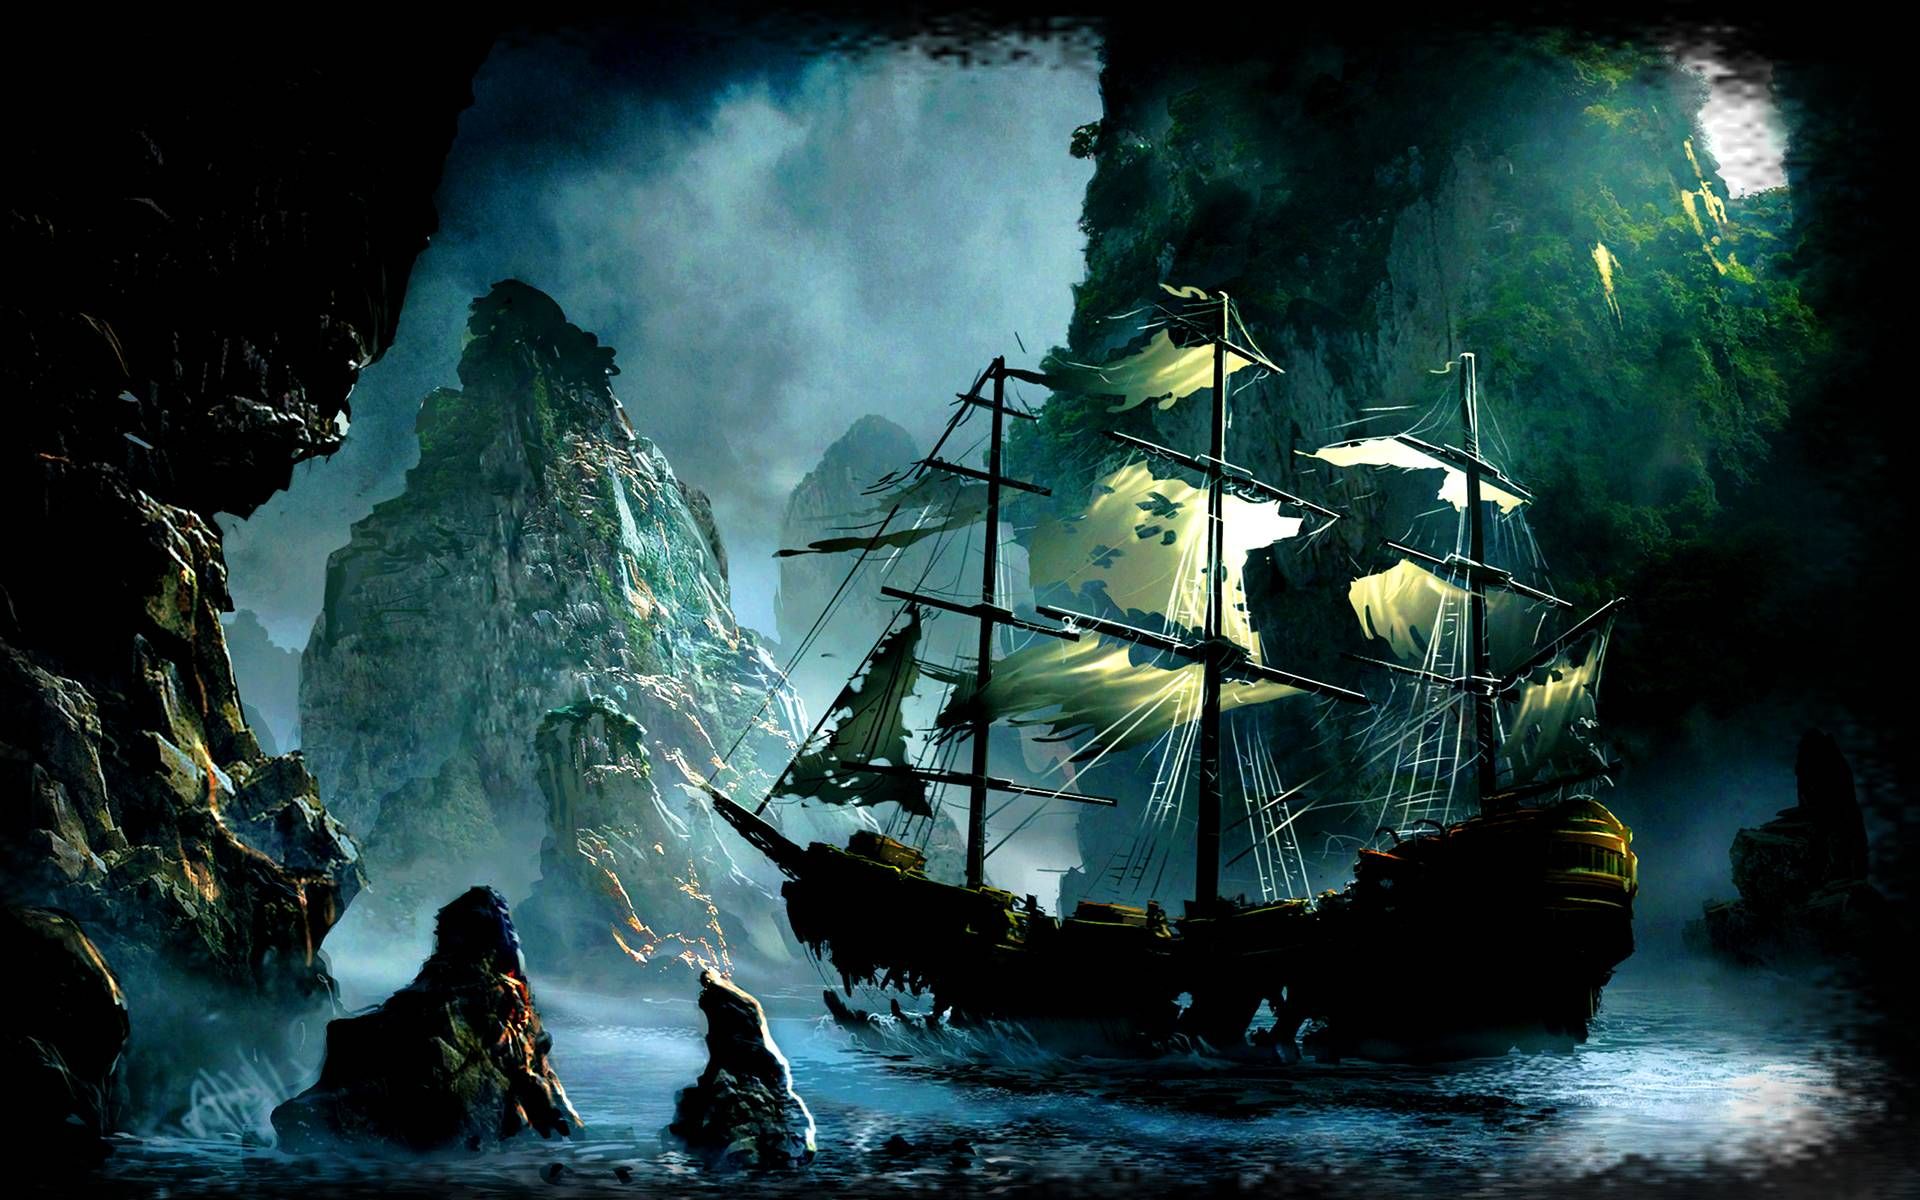 Abin Ghost Pirate Ship Background My Saves In Boat Art